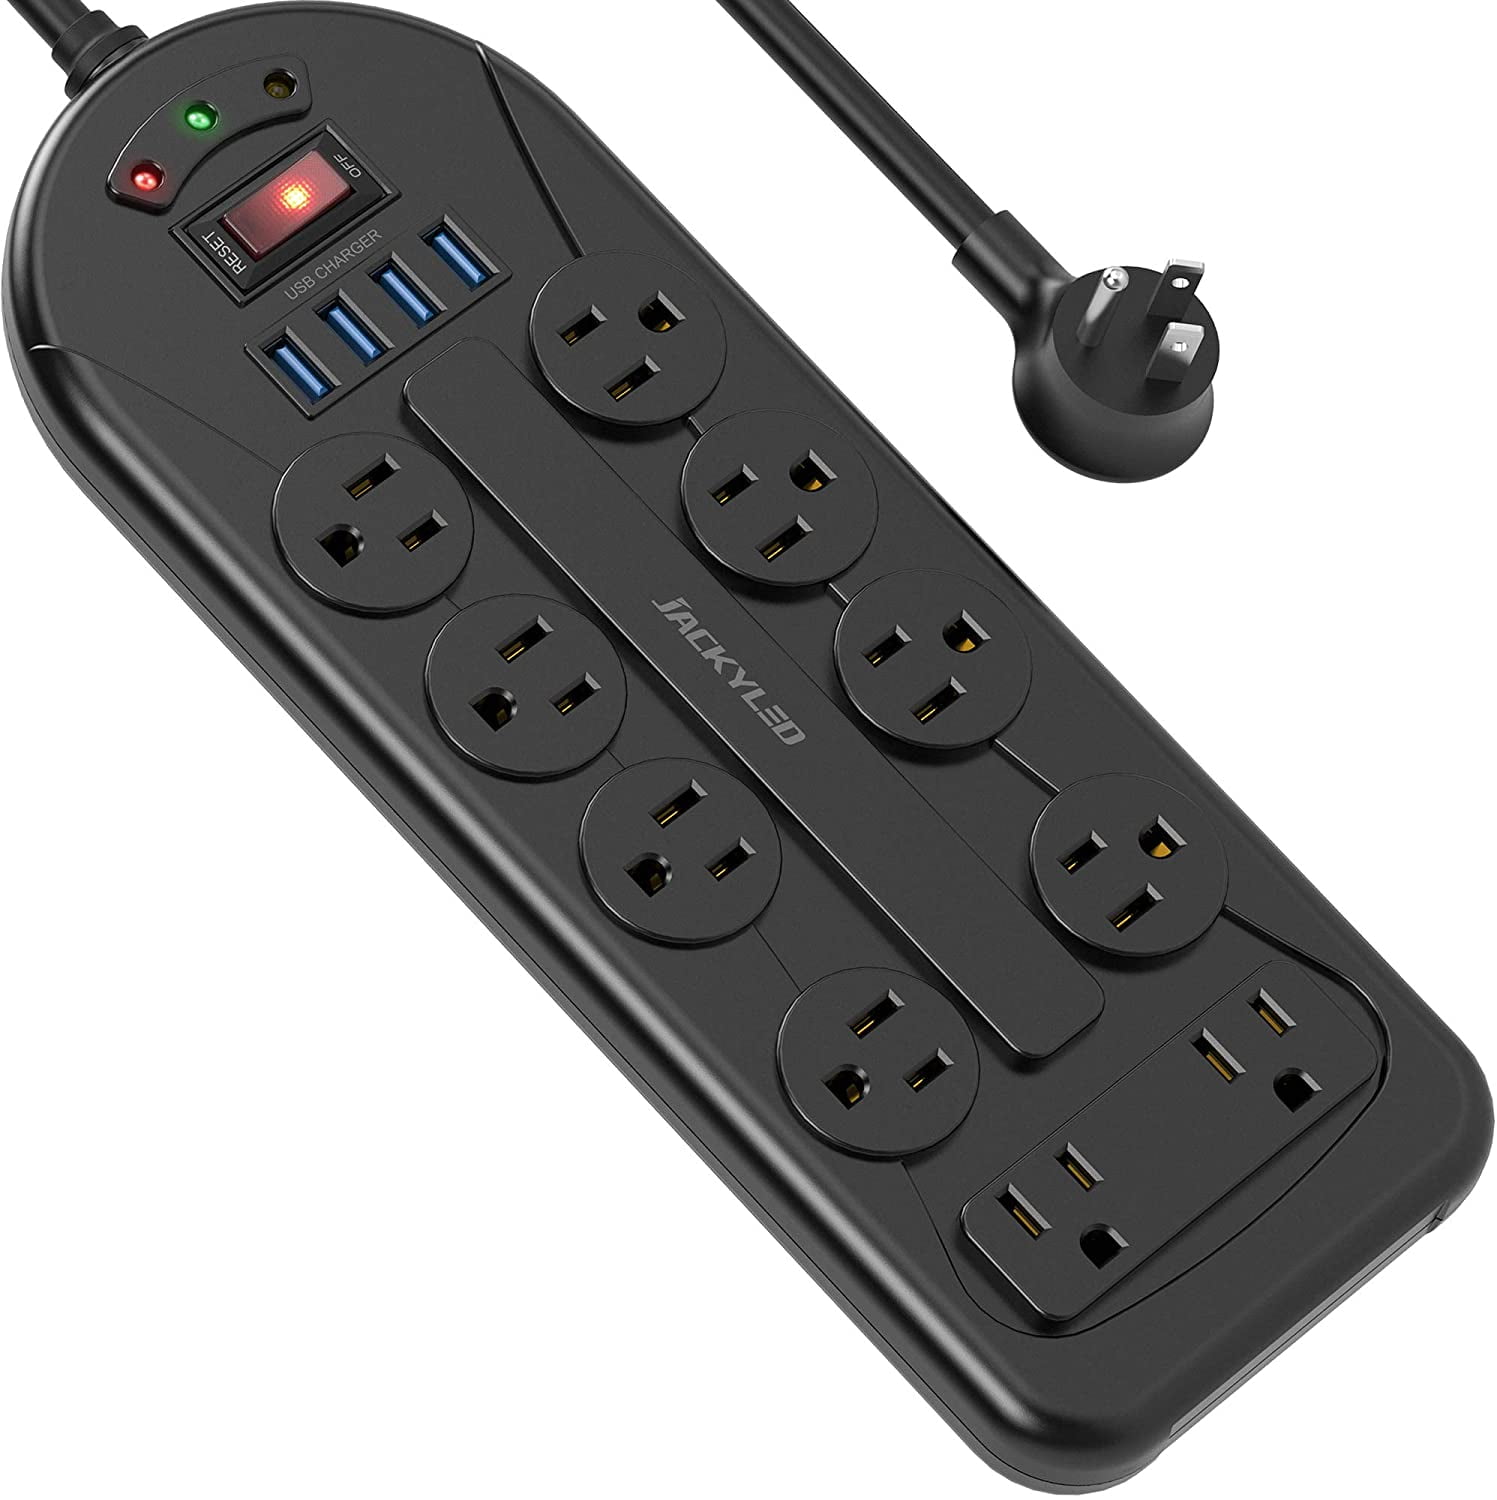 Wall Mountable Surge Protector Power Strip With 6 USB + Flat Plug Extension  Cord